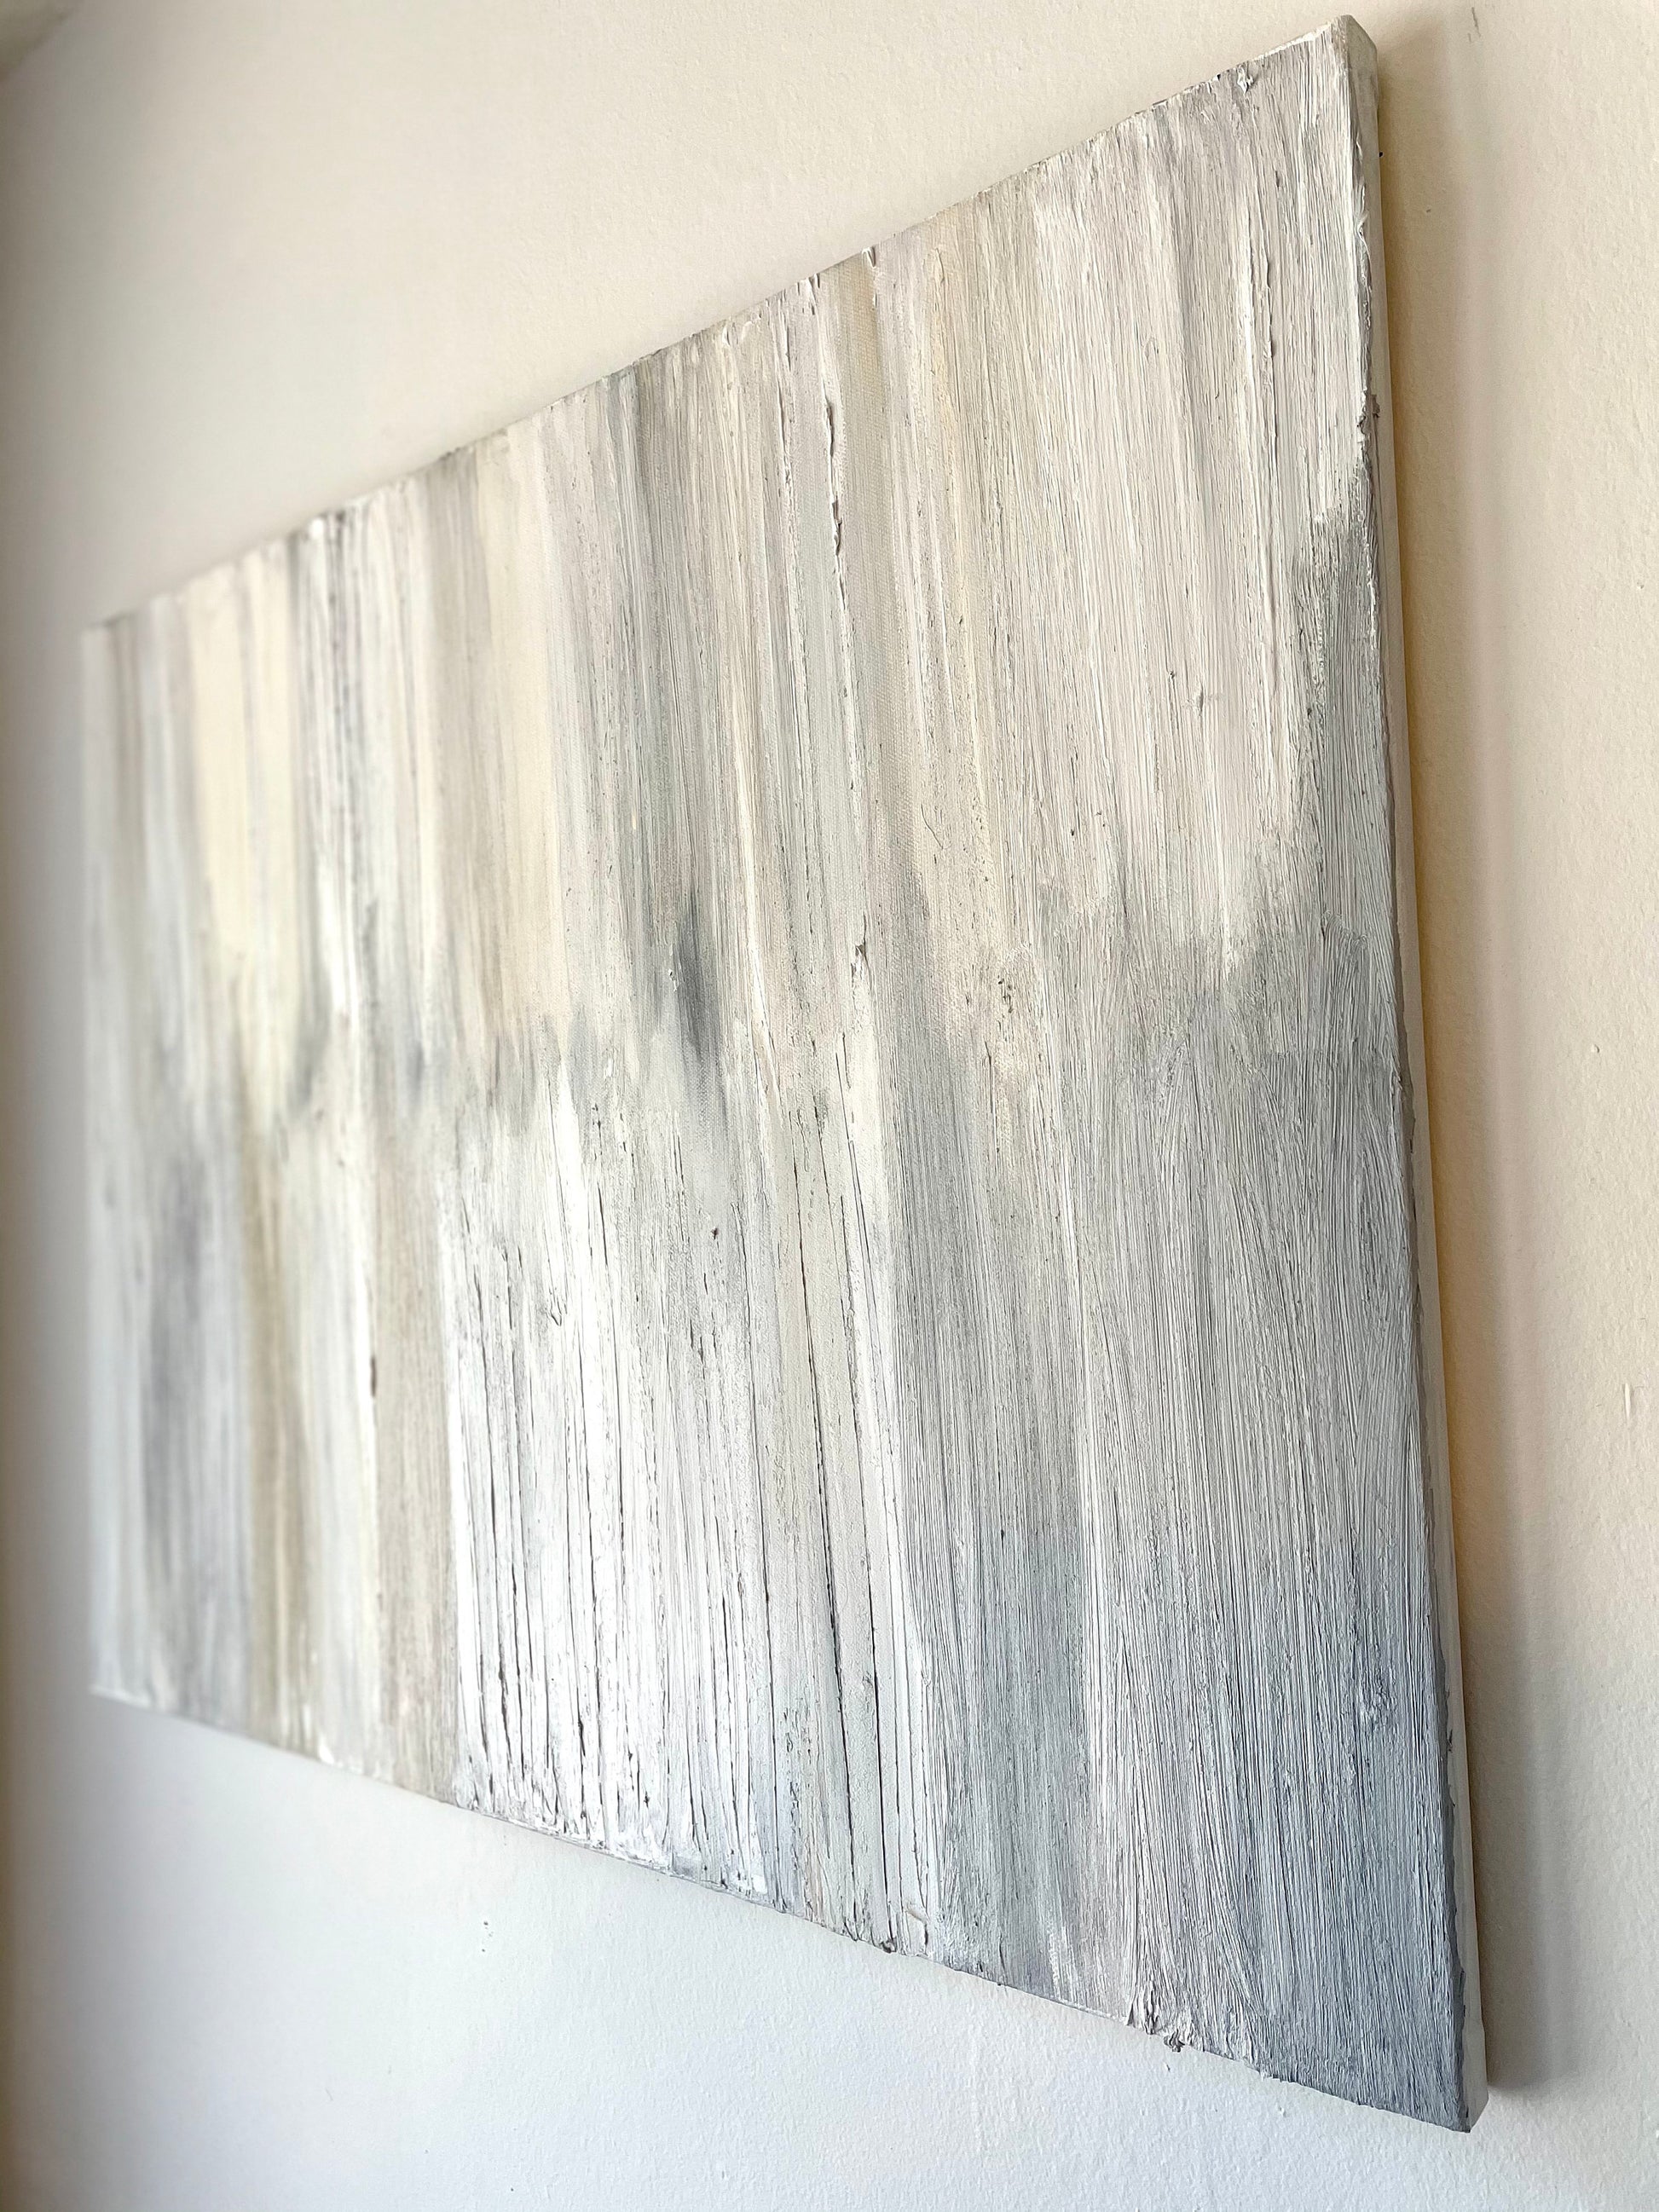 "Abstract art: Vibrant, textured creations for your space." "Texture: Detailed textures in fine art for added depth." "Original art: Unique, one-of-a-kind creations for collectors." "Wall art: Stunning pieces to adorn your walls." "Paintings: Beautifully